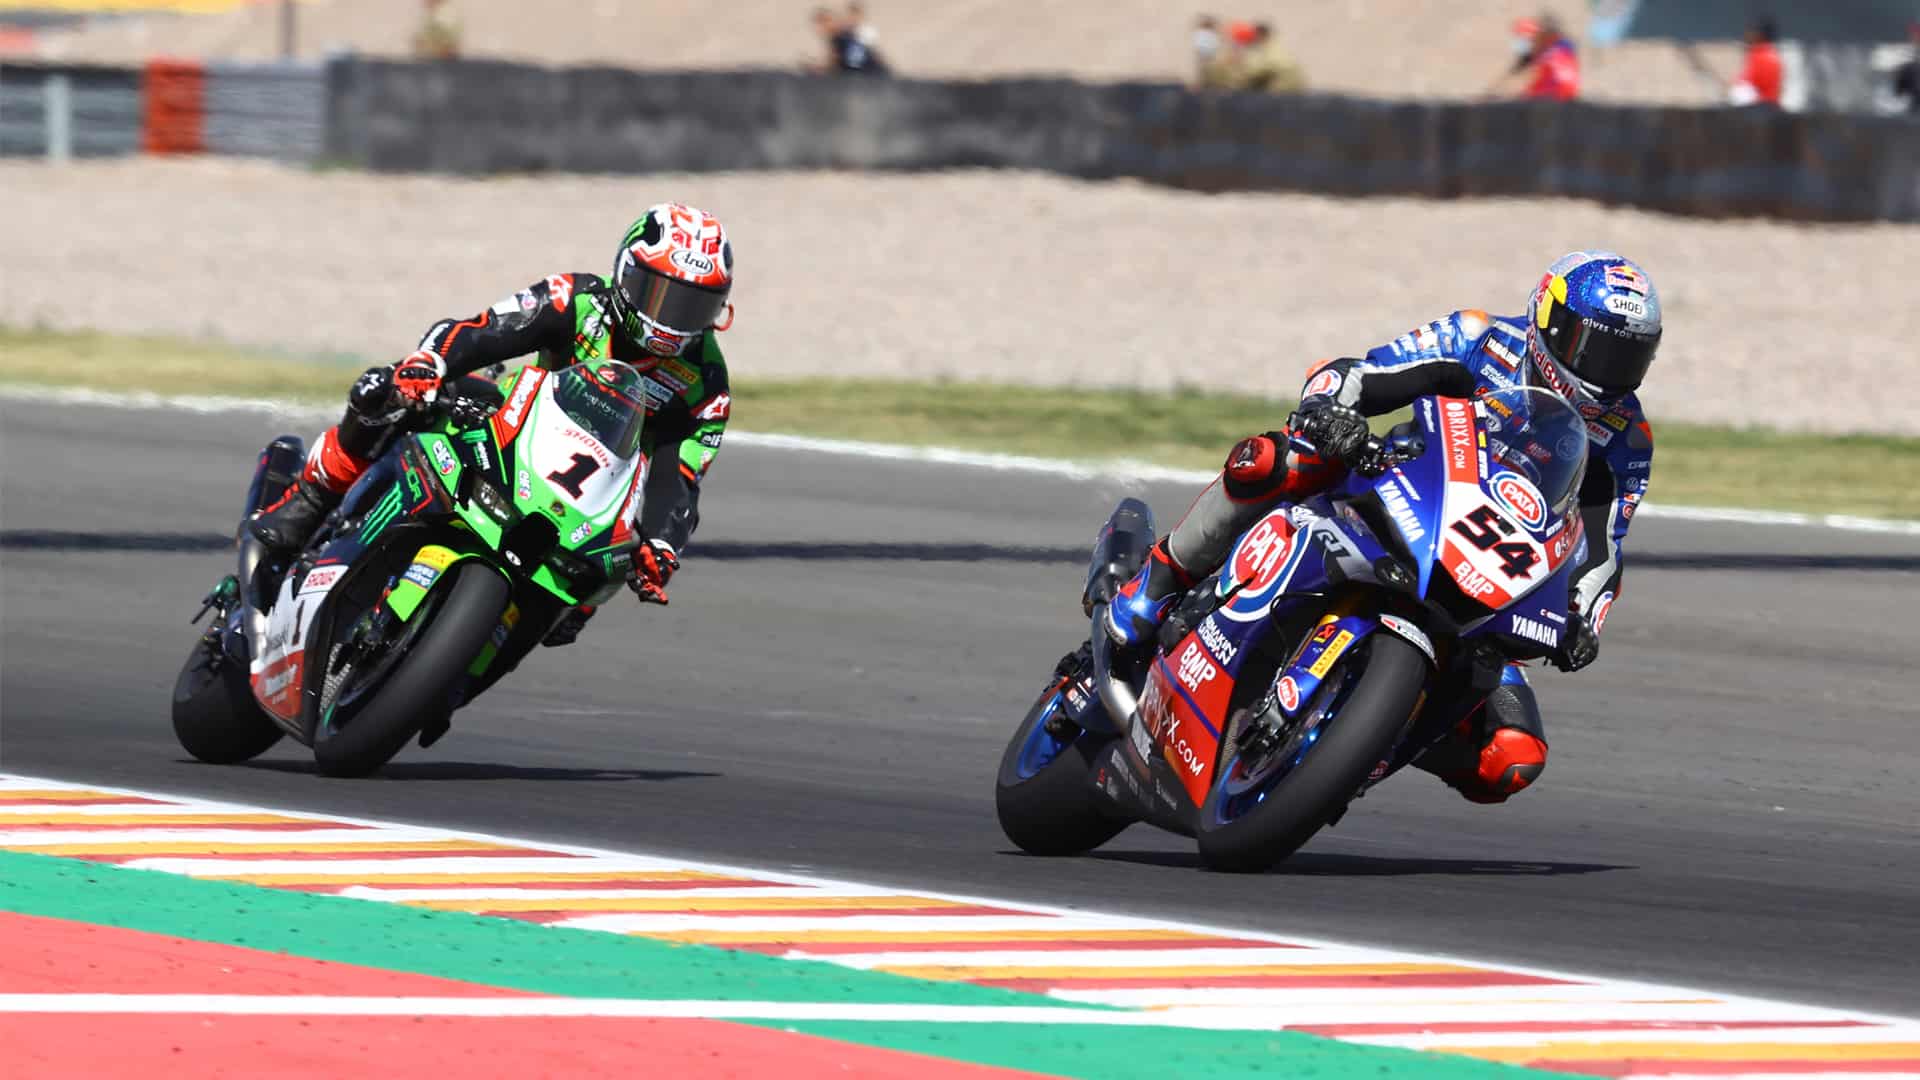 Milestone reacquires WorldSBK motorcycle racing licence, new game soon